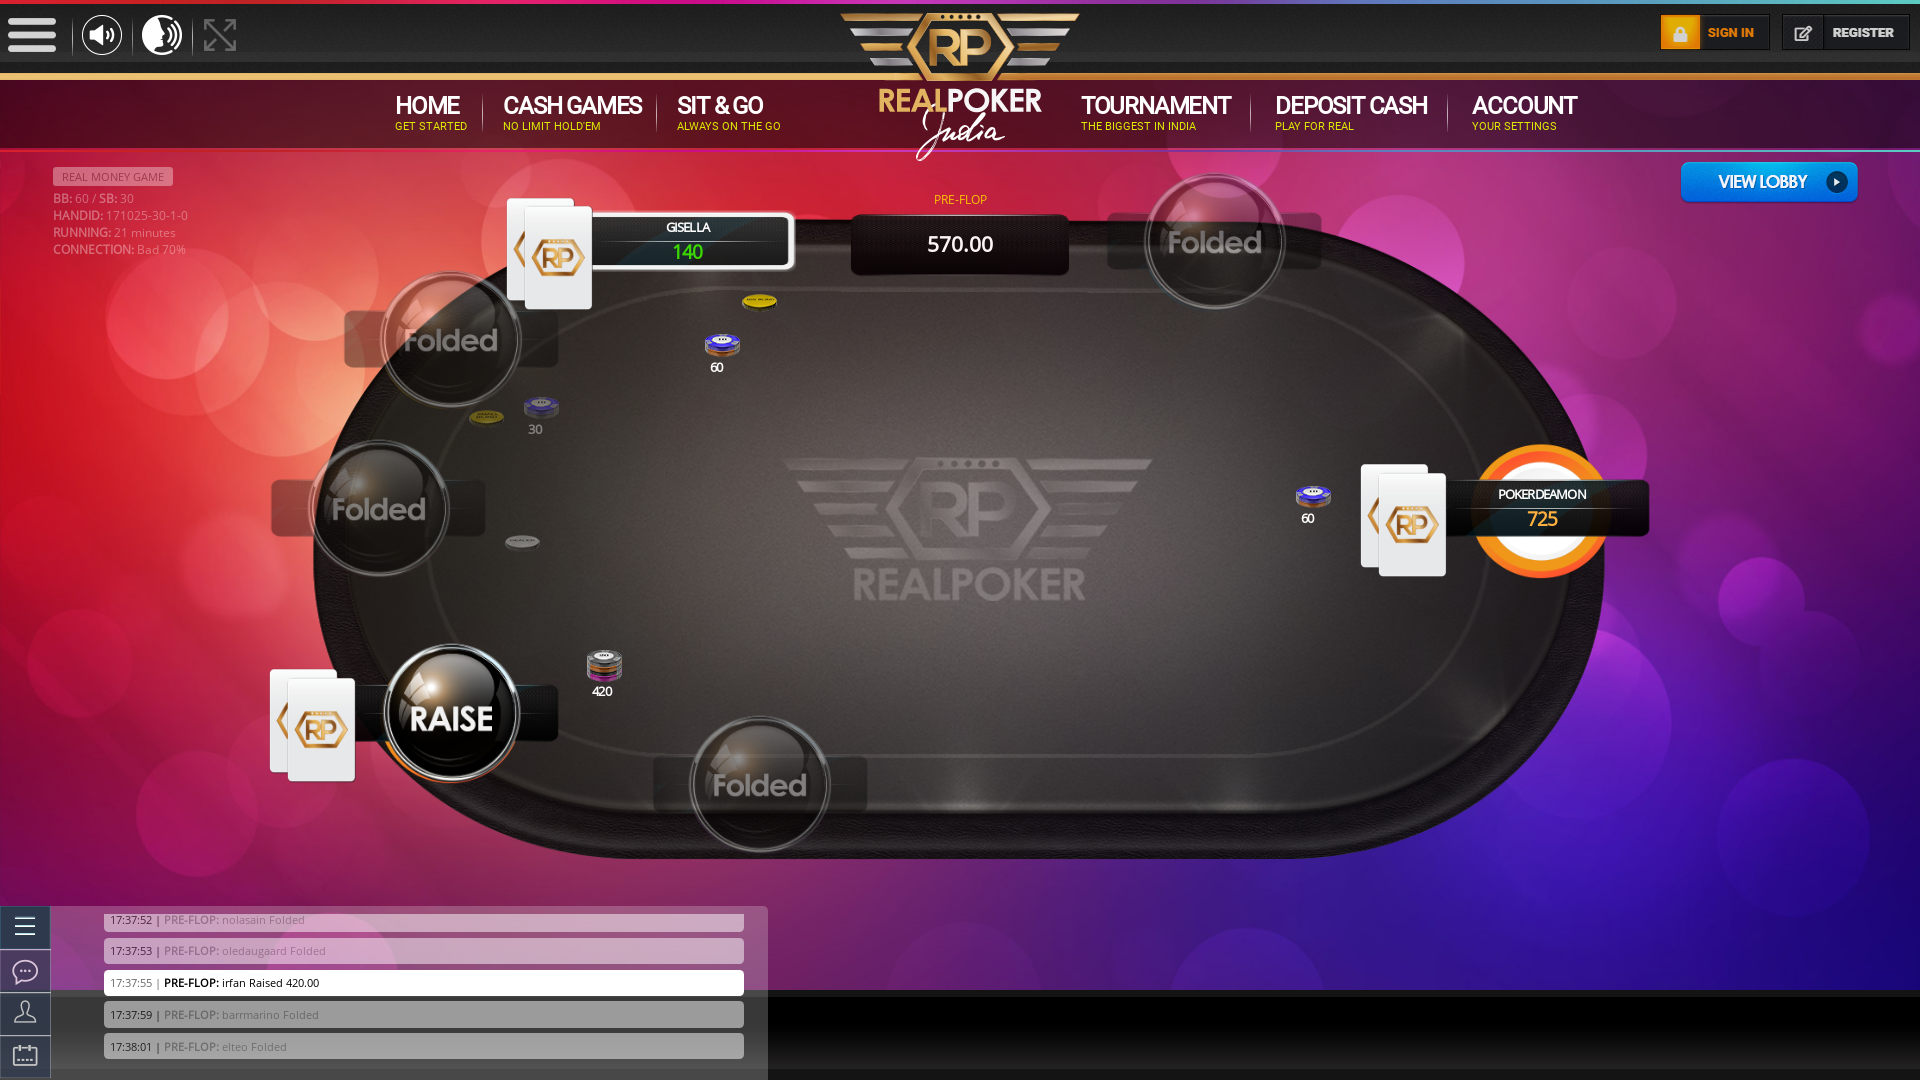 Real poker 10 player table in the 2 match